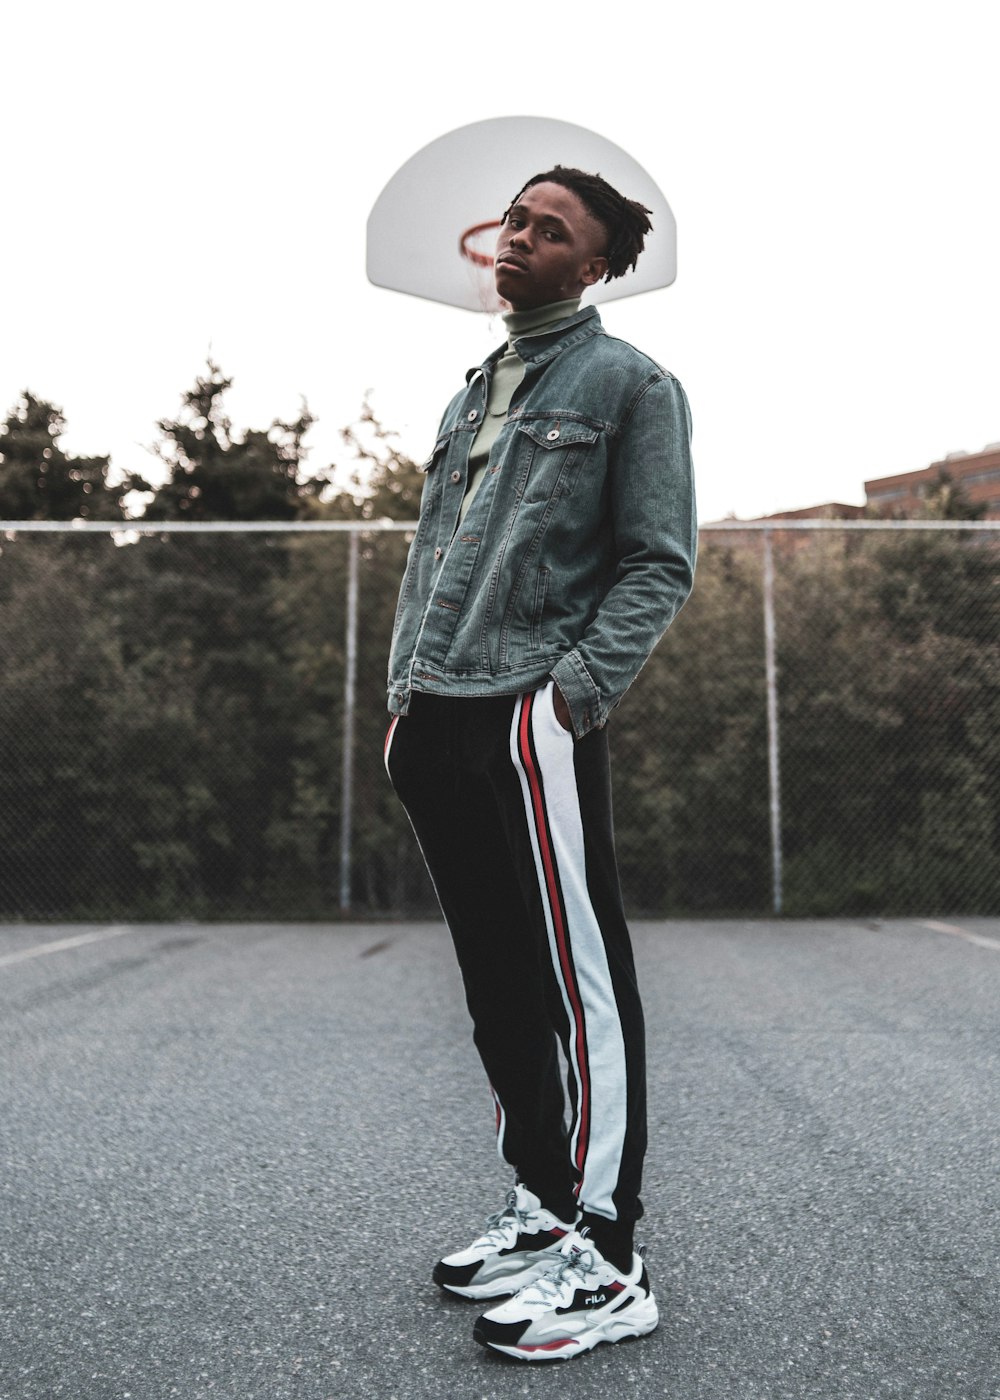 Man in blue denim jacket and black pants wearing white cowboy hat standing  on road during photo – Free Style Image on Unsplash